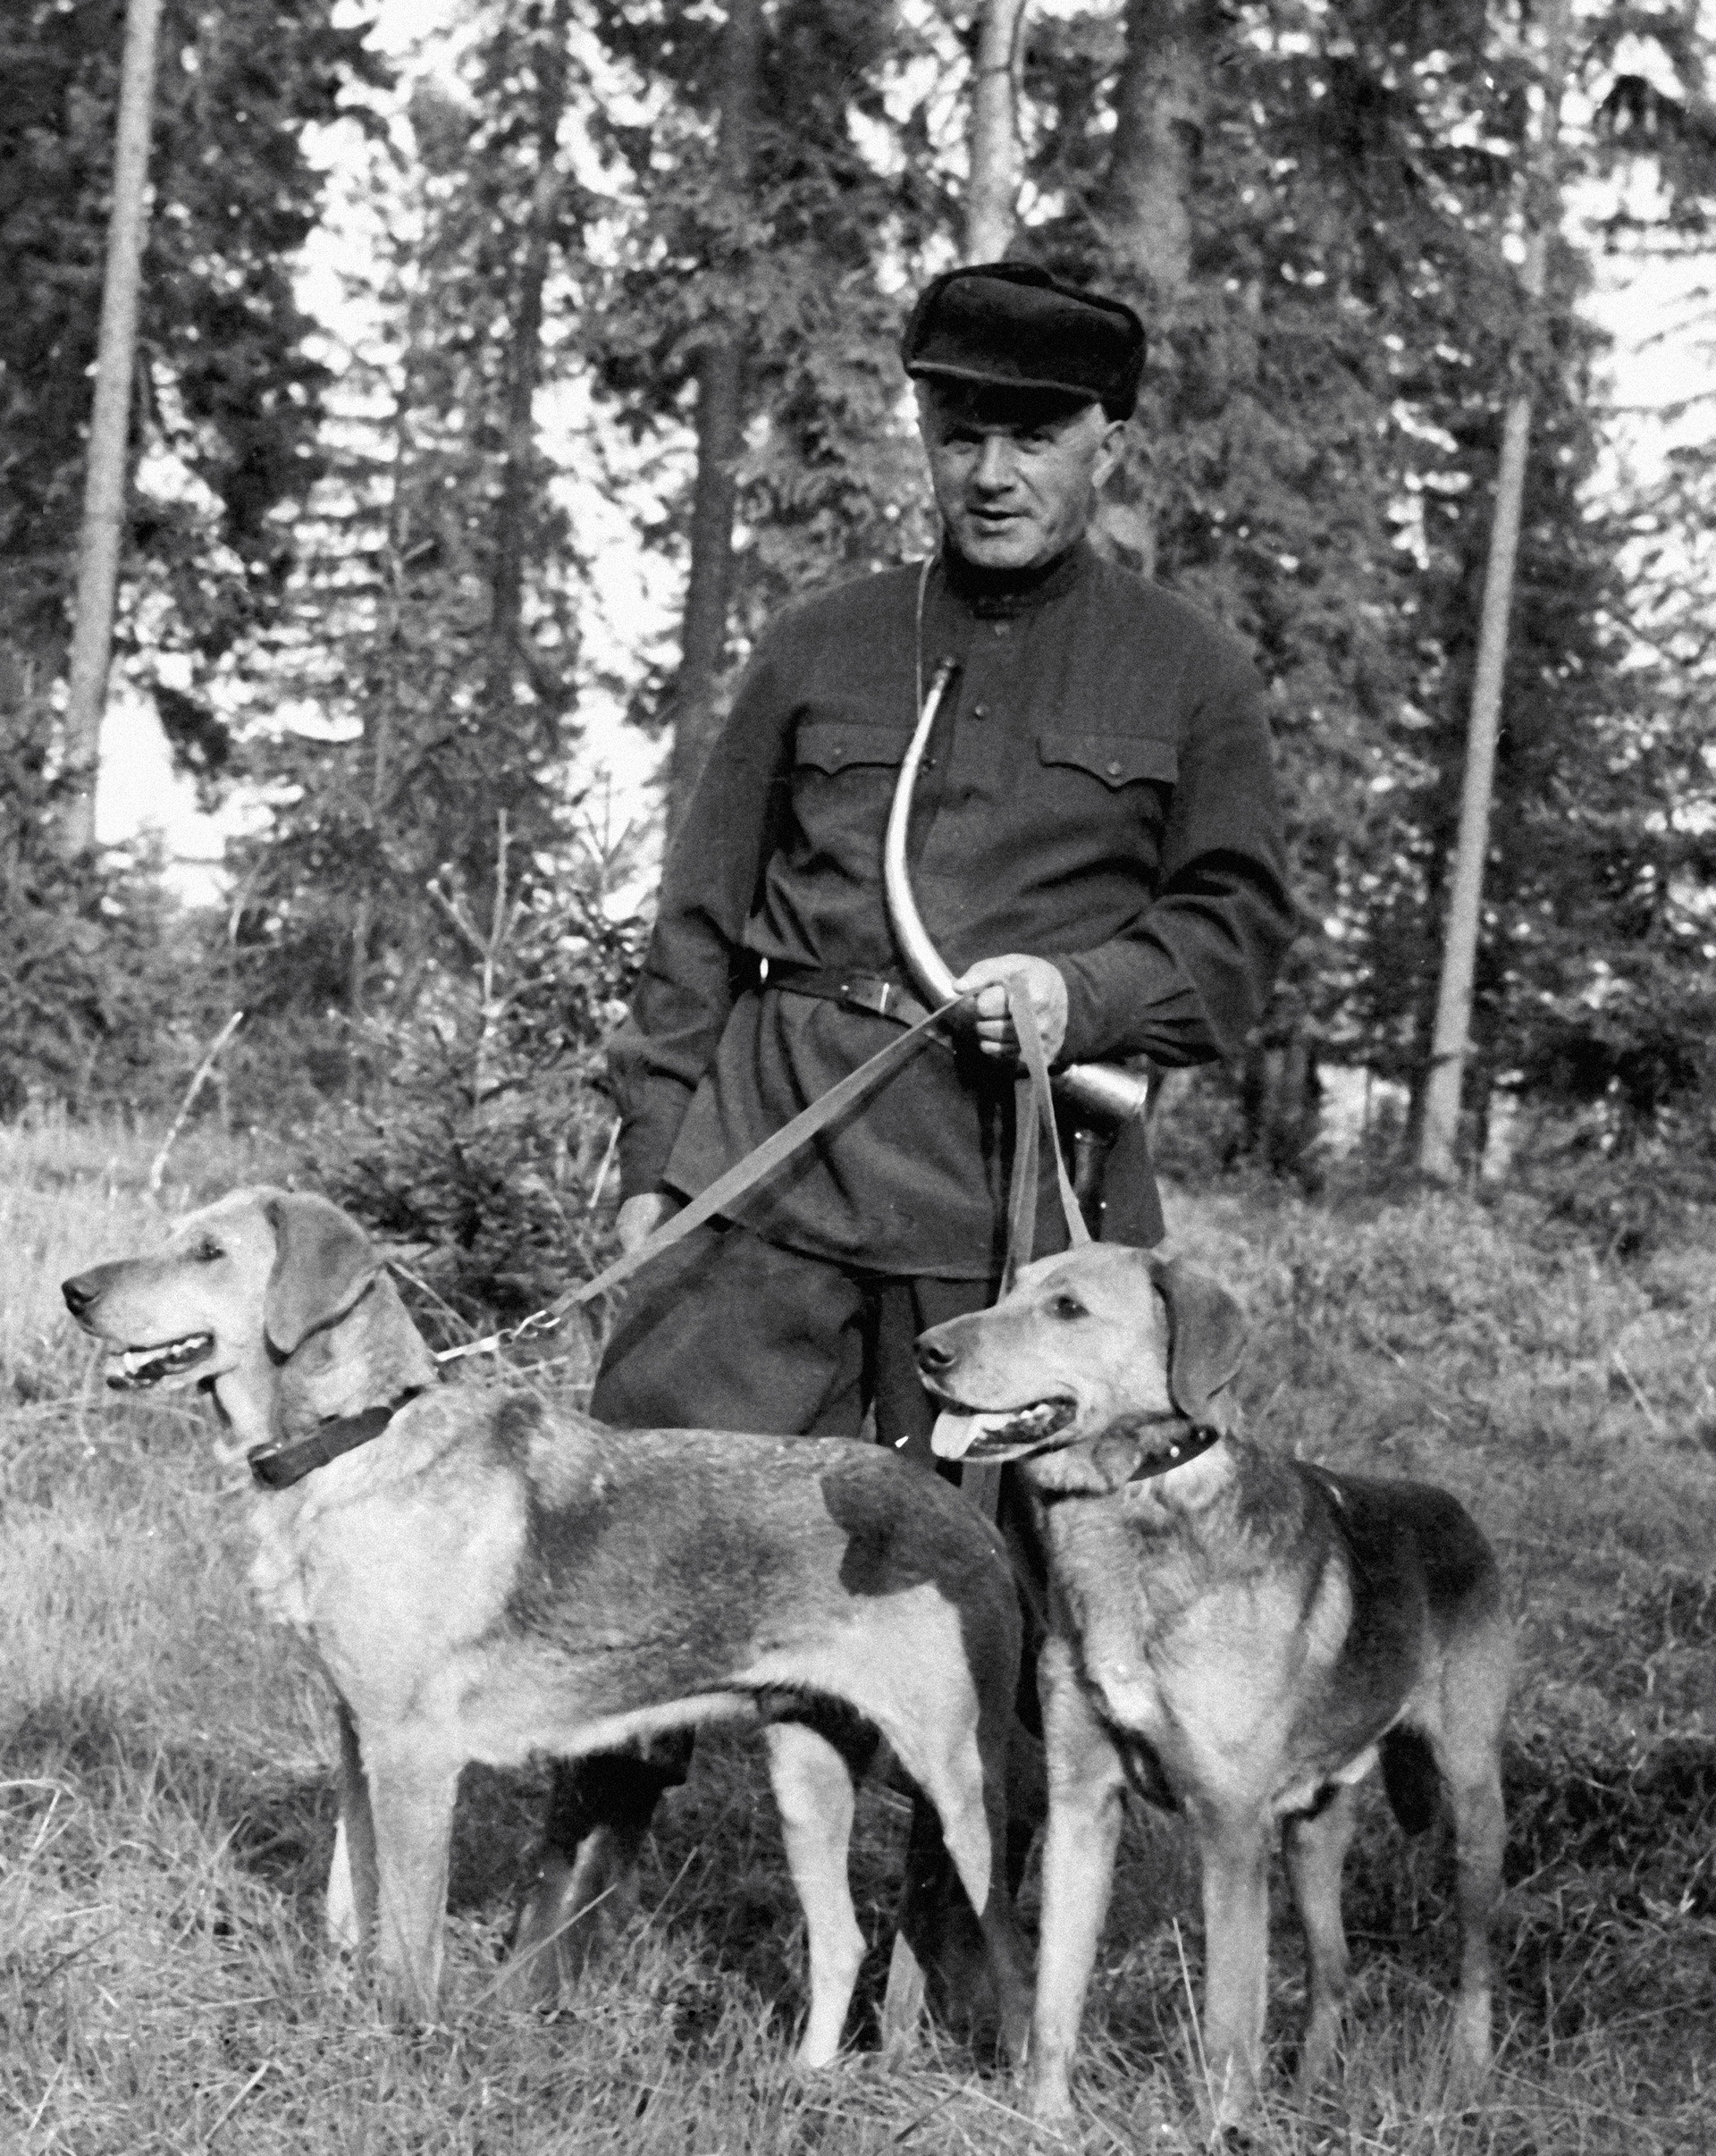 A hunter with his dogs – Russian hounds named Shugay and Kopeika